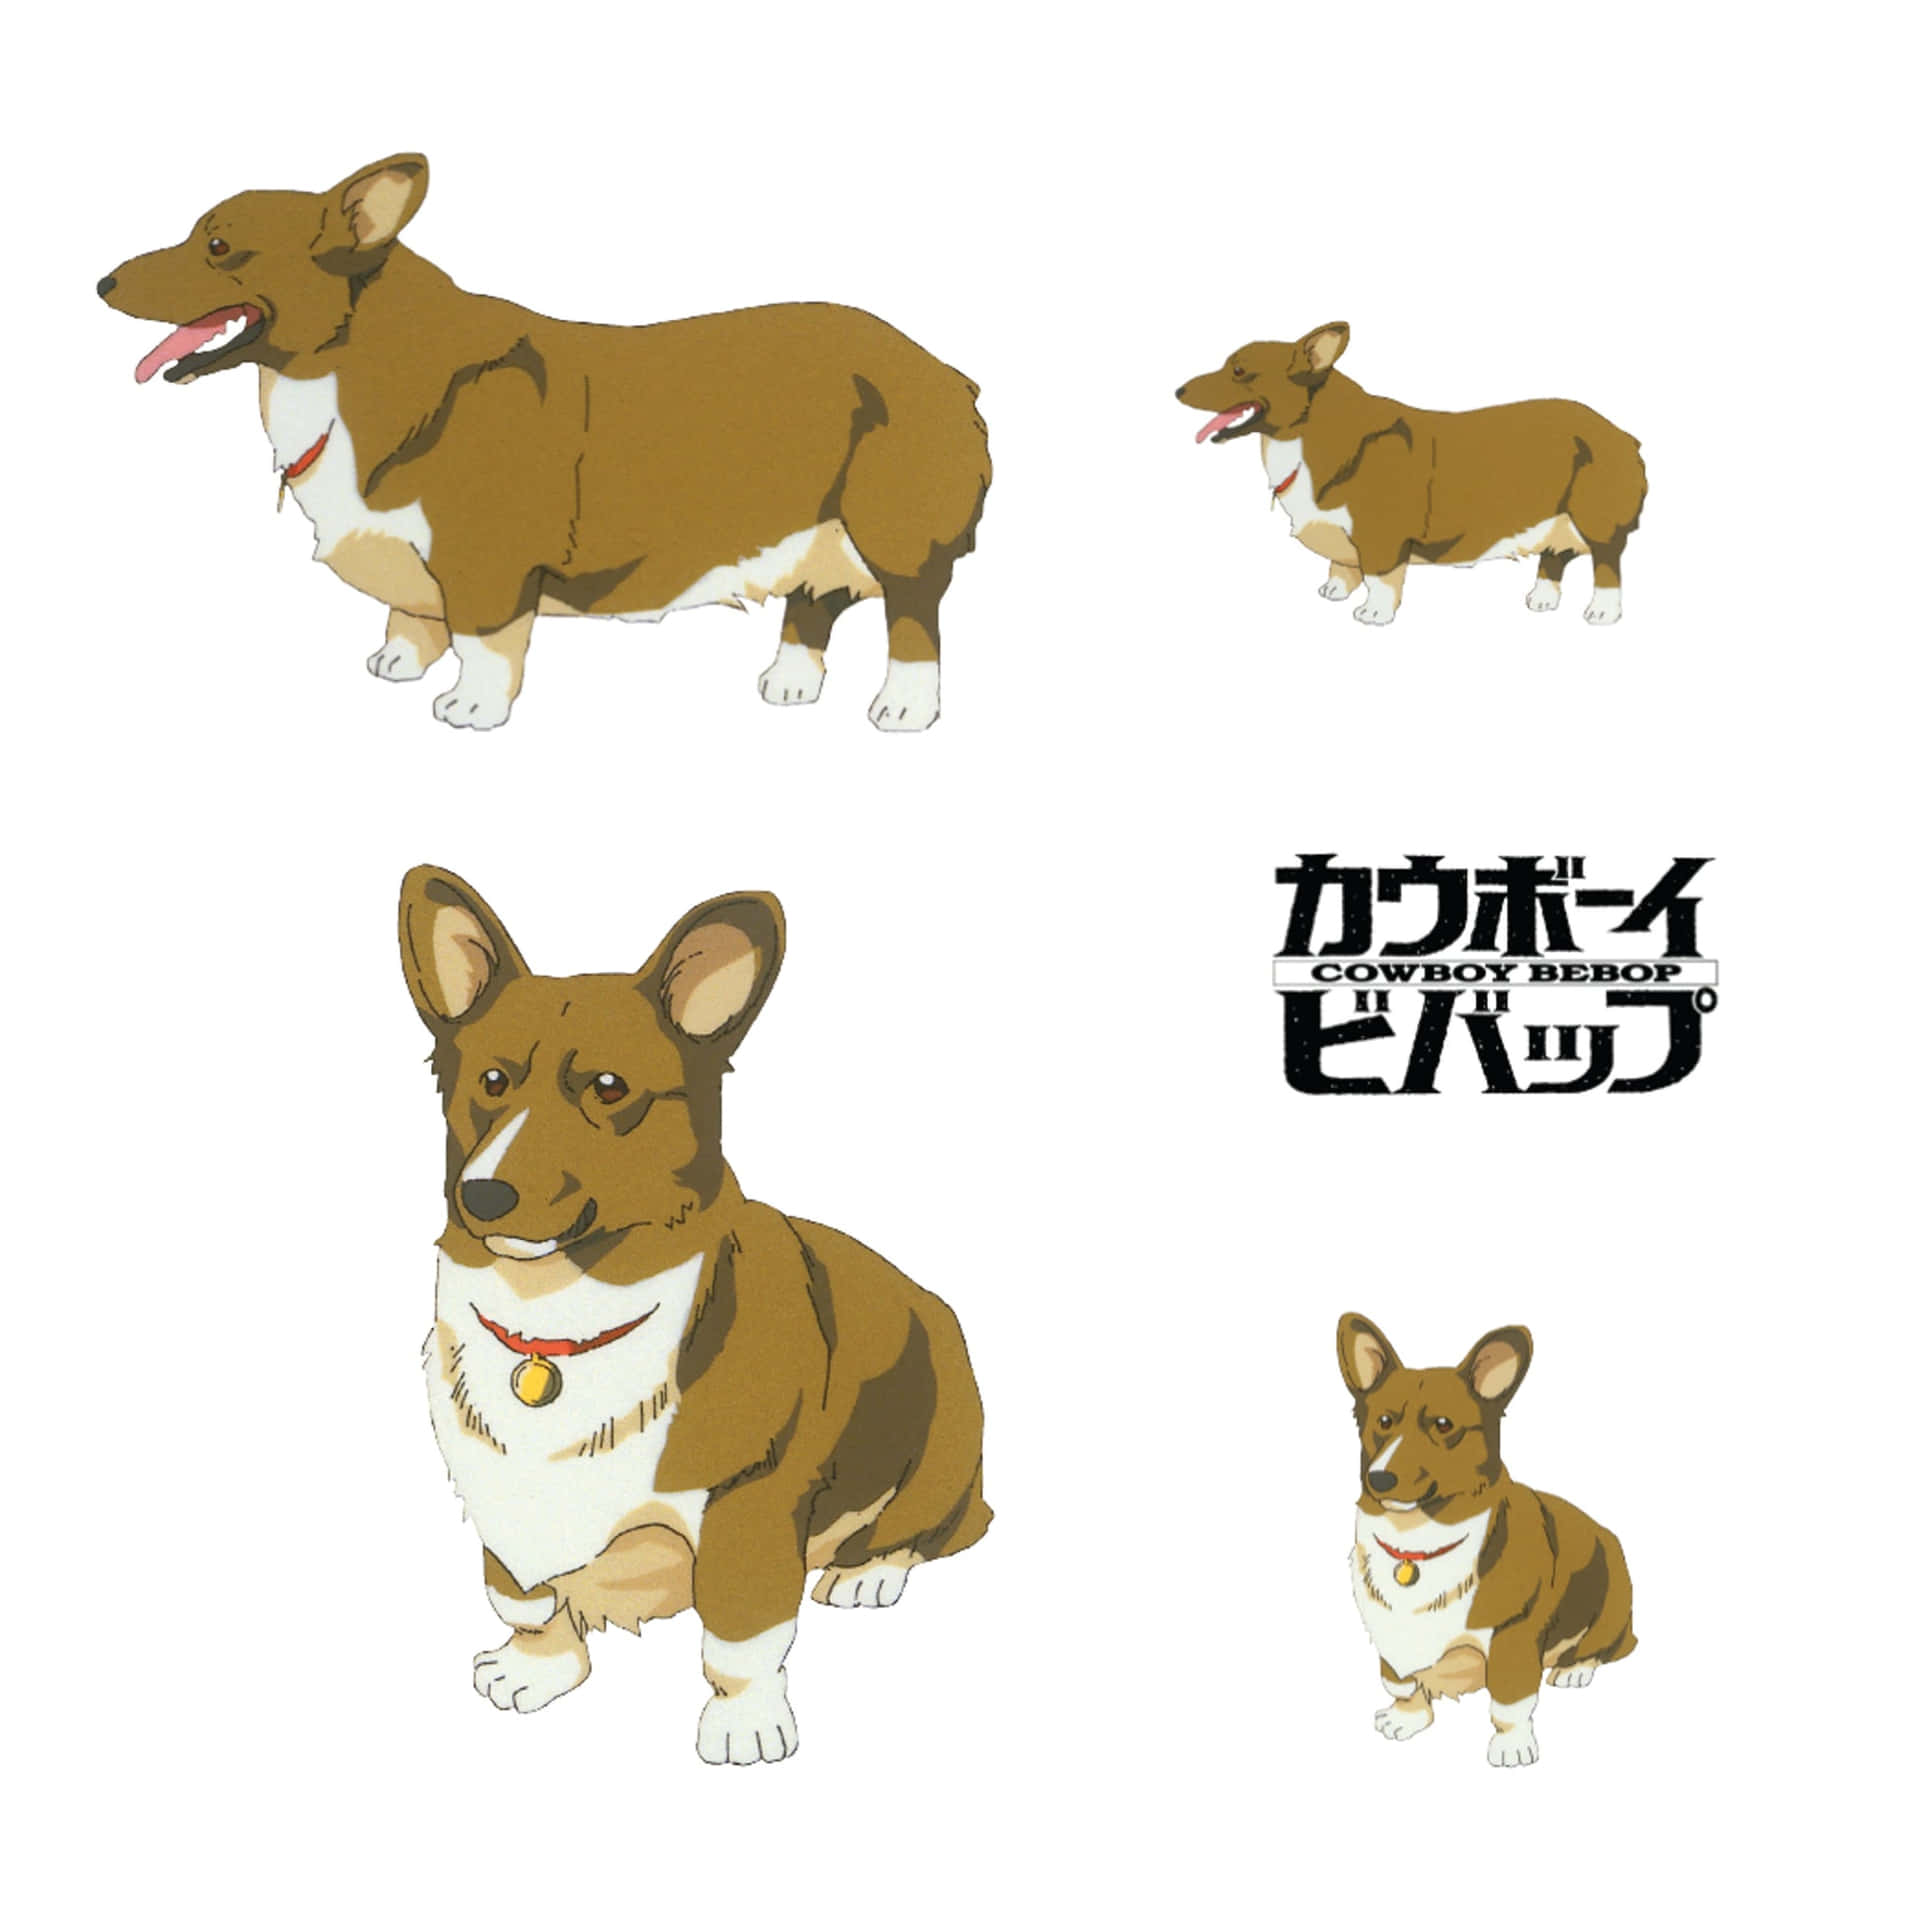 A charming illustration of Ein from Cowboy Bebop Wallpaper